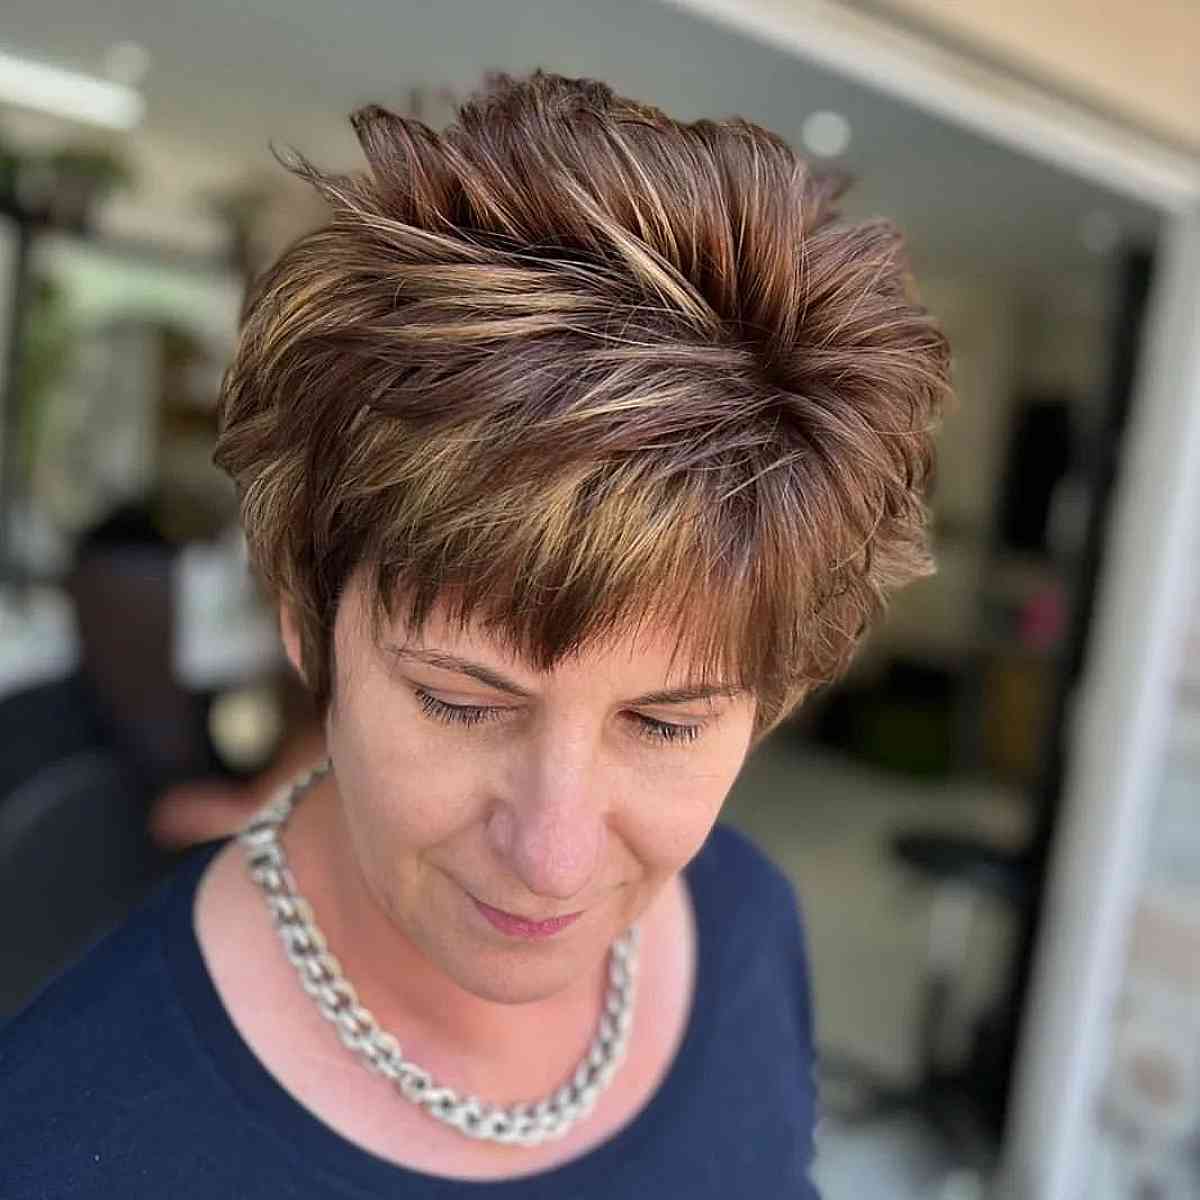 Spiky Cropped Cut with Bangs for Ladies Over Fifty